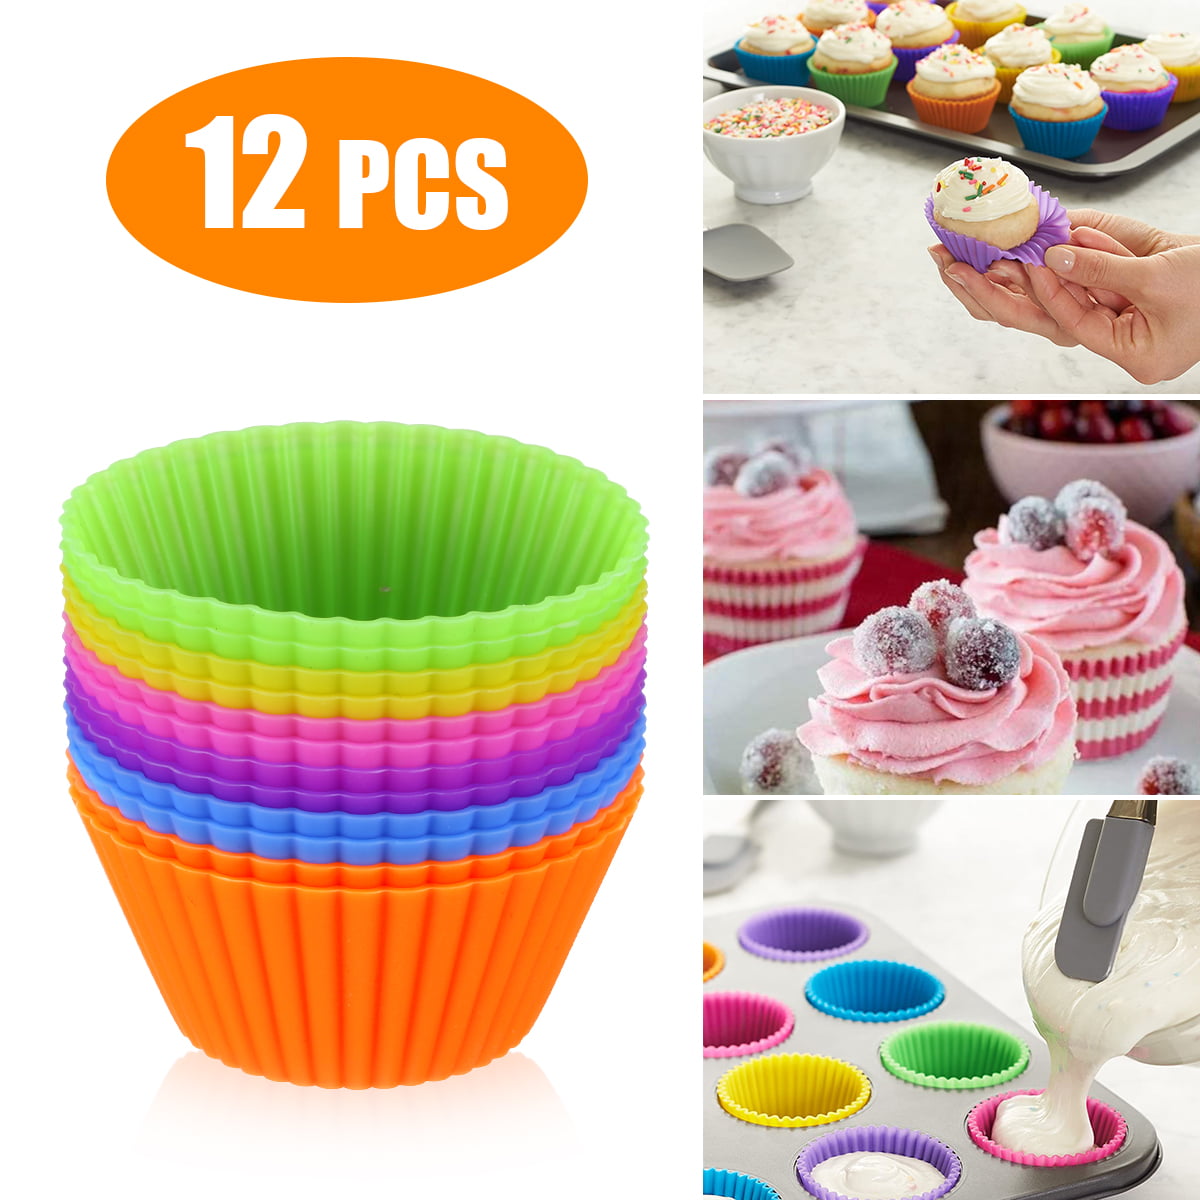 12pcs Silicone Cake Muffin Chocolate Cupcake Liner Baking Cup Cookie Mold